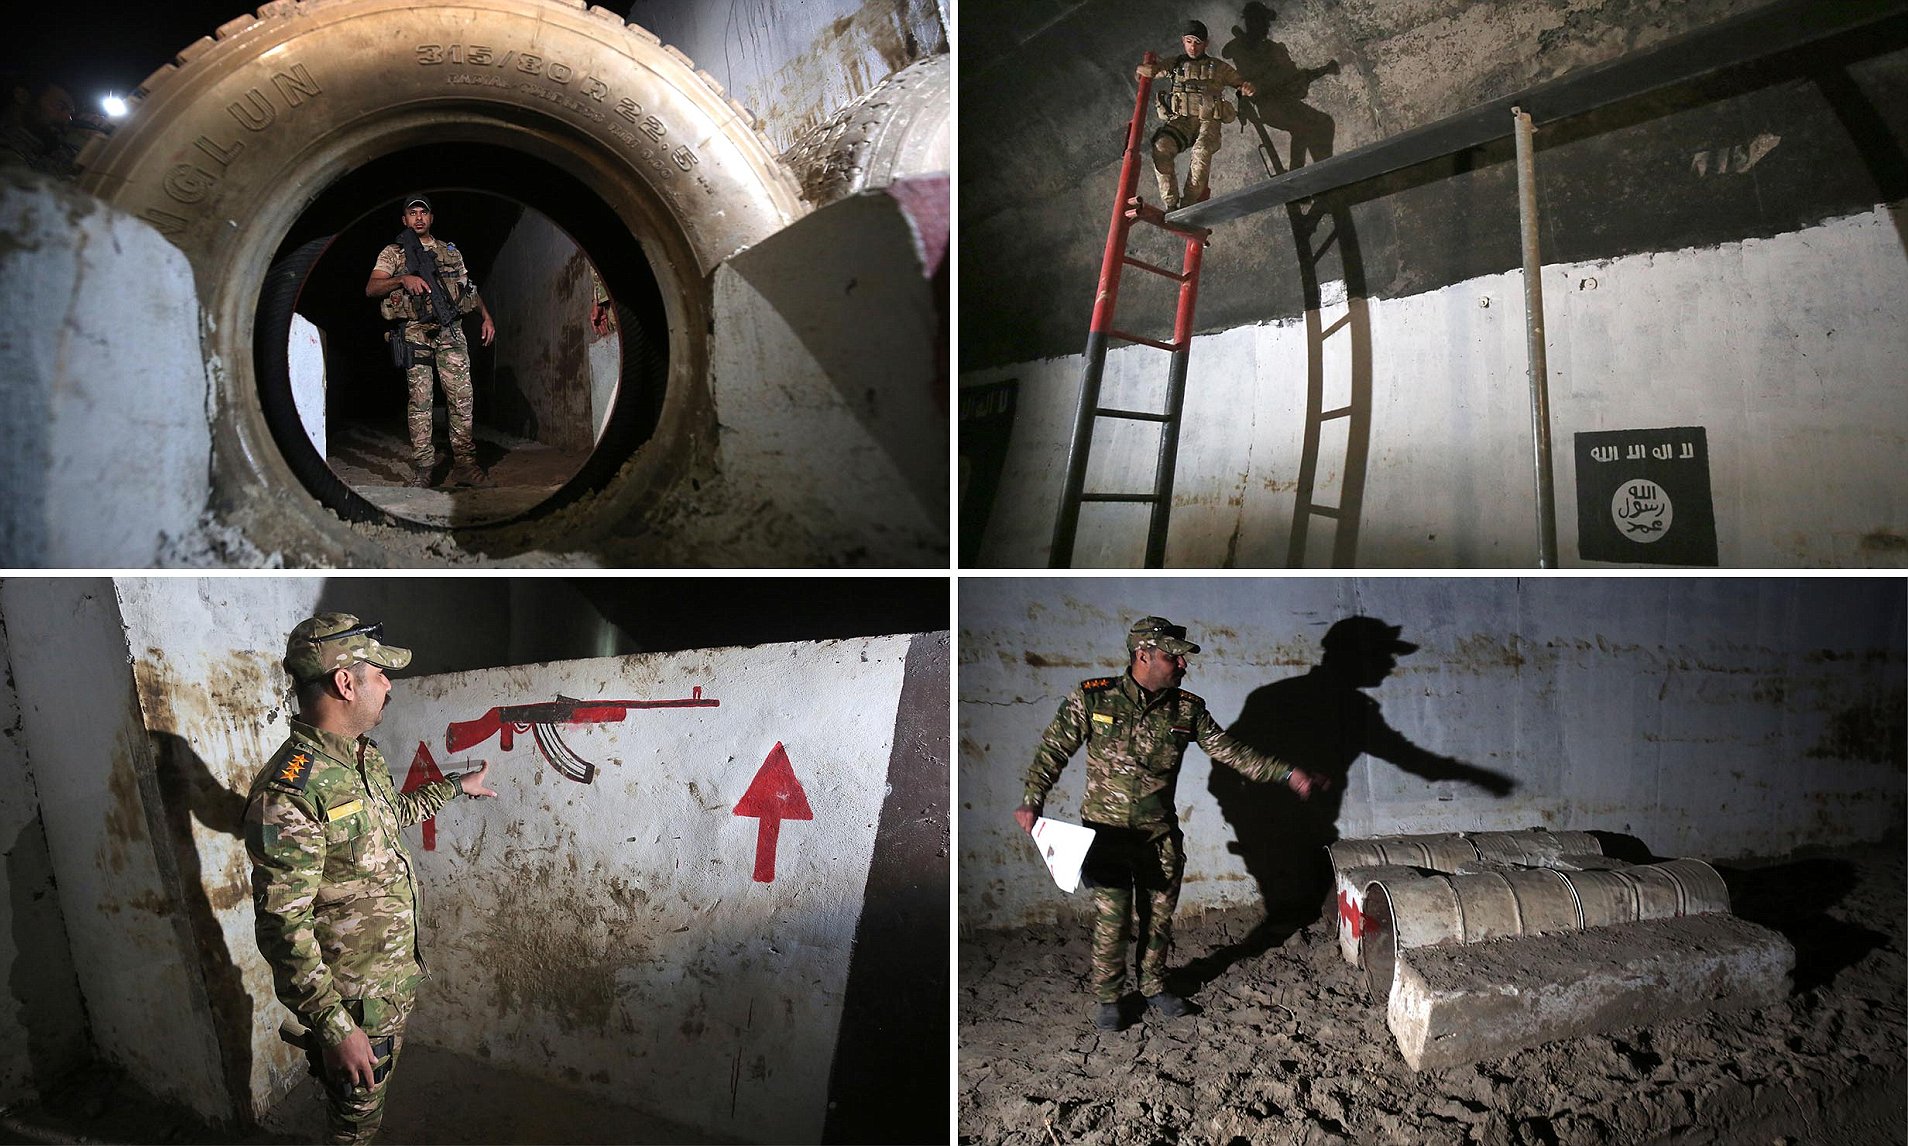 TOPSHOT - A member of the Iraqi forces inspects a tunnel that was reportedly used as a training centre by the jihadists of the Islamic State (IS) group, on March 1, 2017, in the village of Albu Sayf, on the southern outskirts of Mosul.nIraqi forces launched a major push on February 19 to recapture the west of Mosul from the Islamic State jihadist group, retaking the airport and then advancing north. / AFP / AHMAD AL-RUBAYE (Photo credit should read AHMAD AL-RUBAYE/AFP/Getty Images)